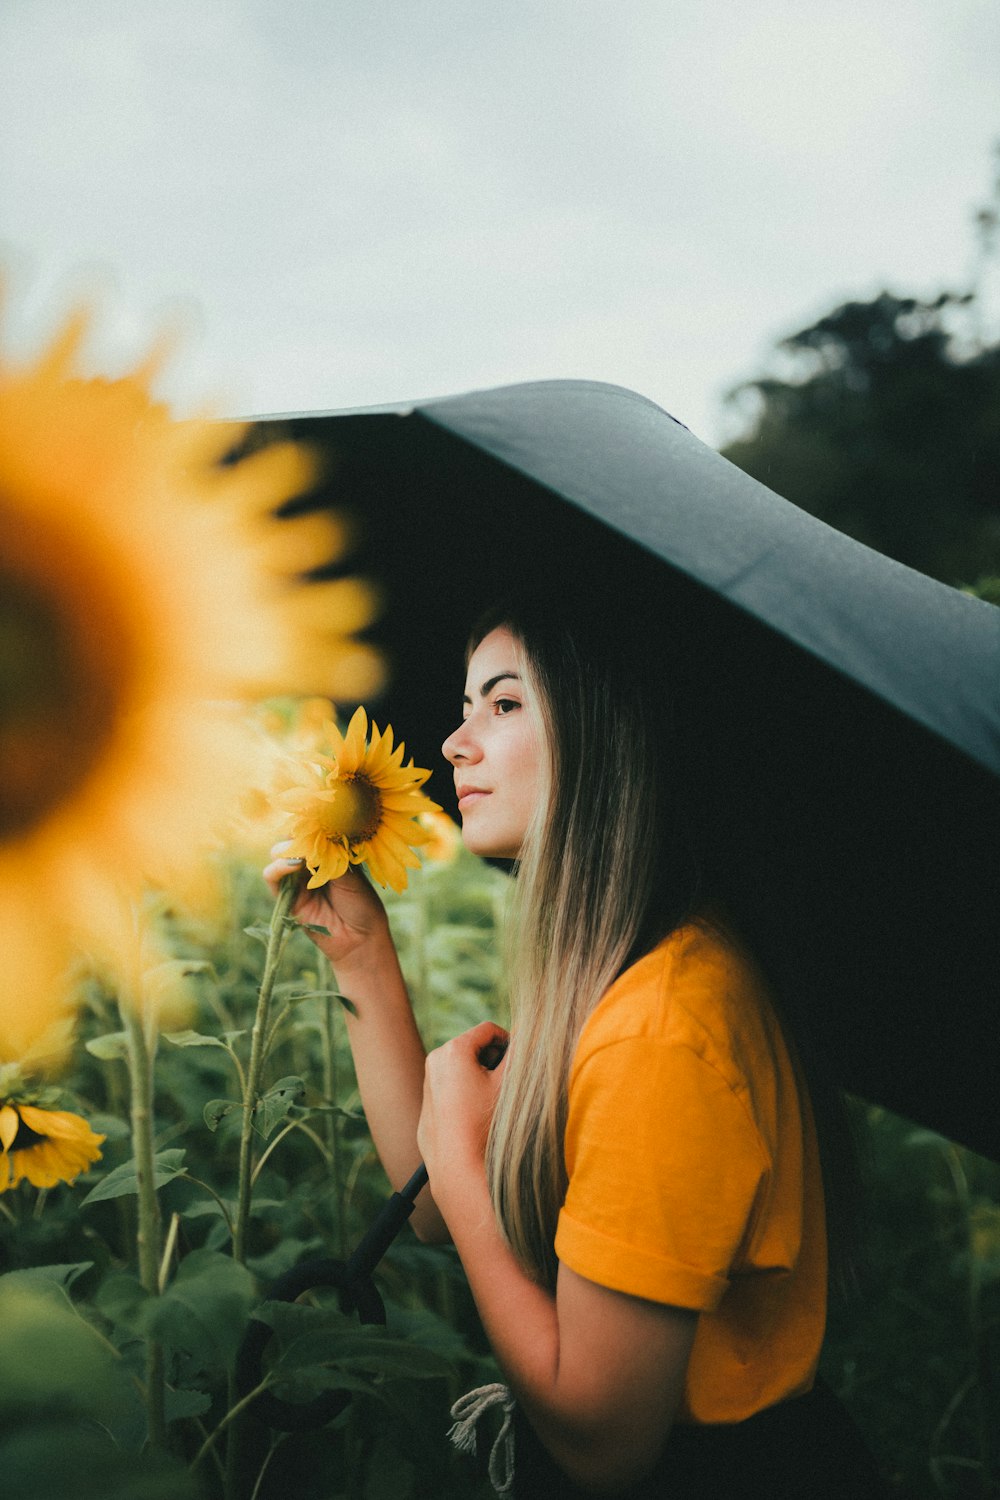 a woman standing in a field of sunflowers holding an umbrella